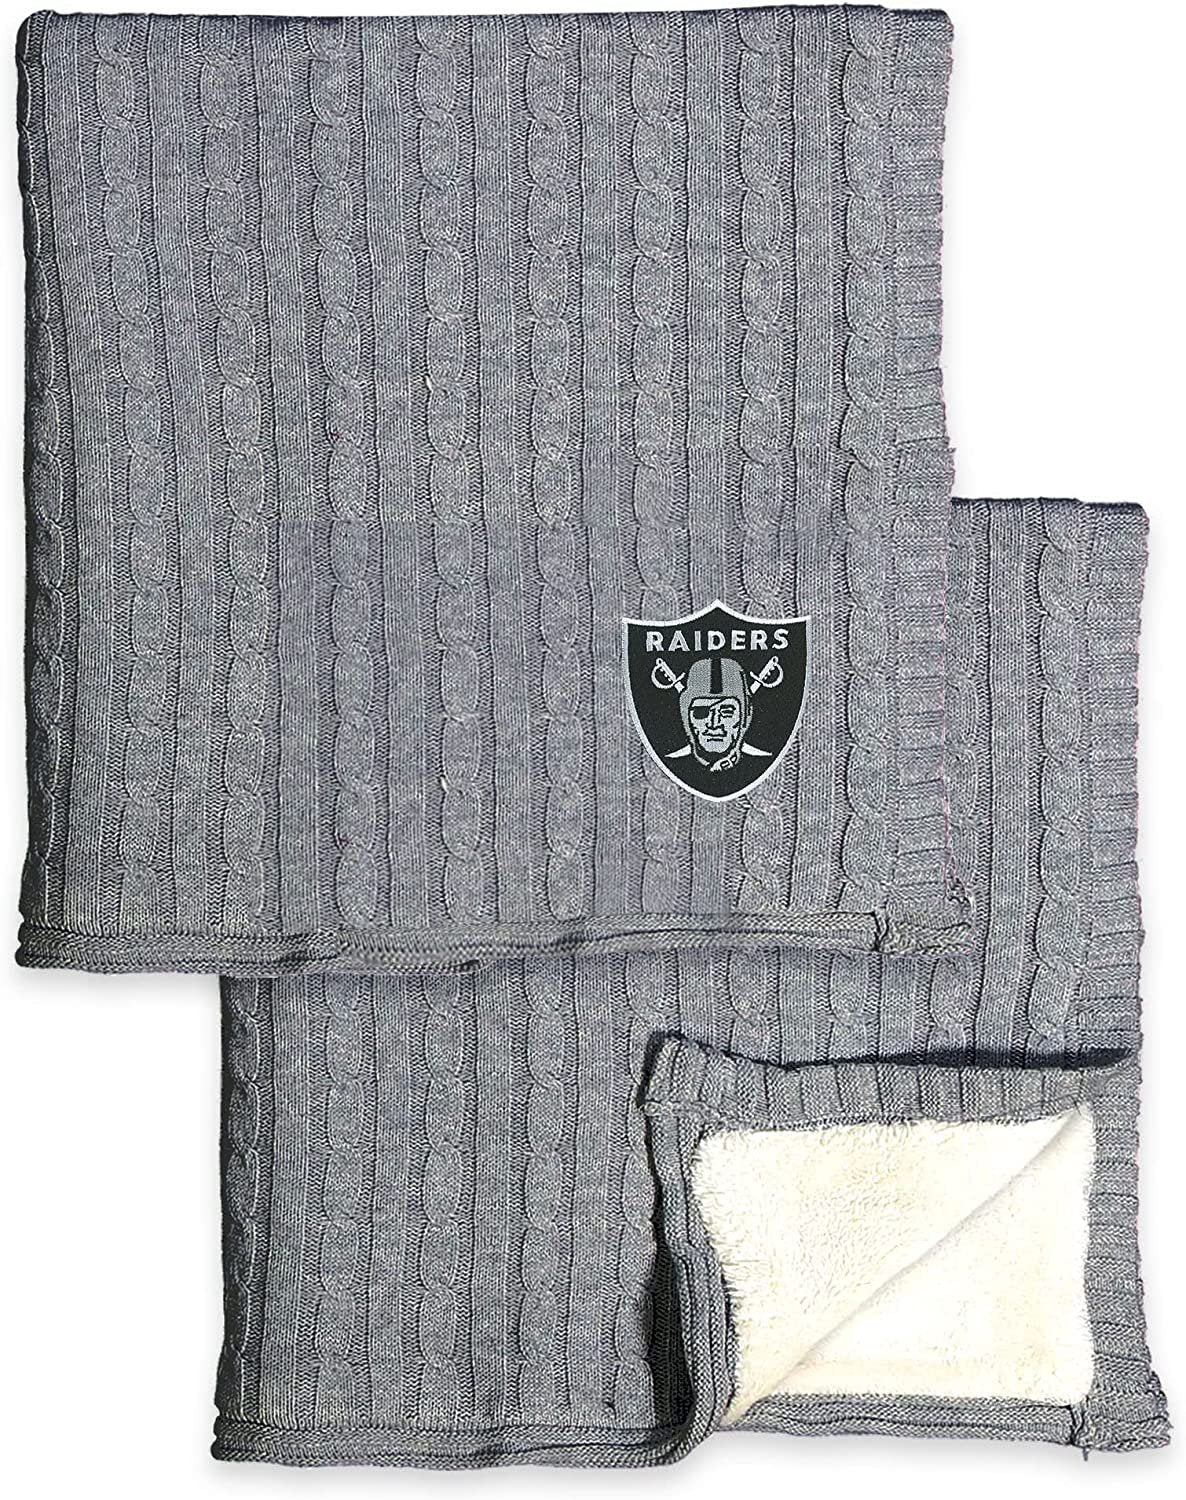 Las Vegas Raiders Cable Sweater Knit Sherpa Throw Blanket 50x60 Inch Adult